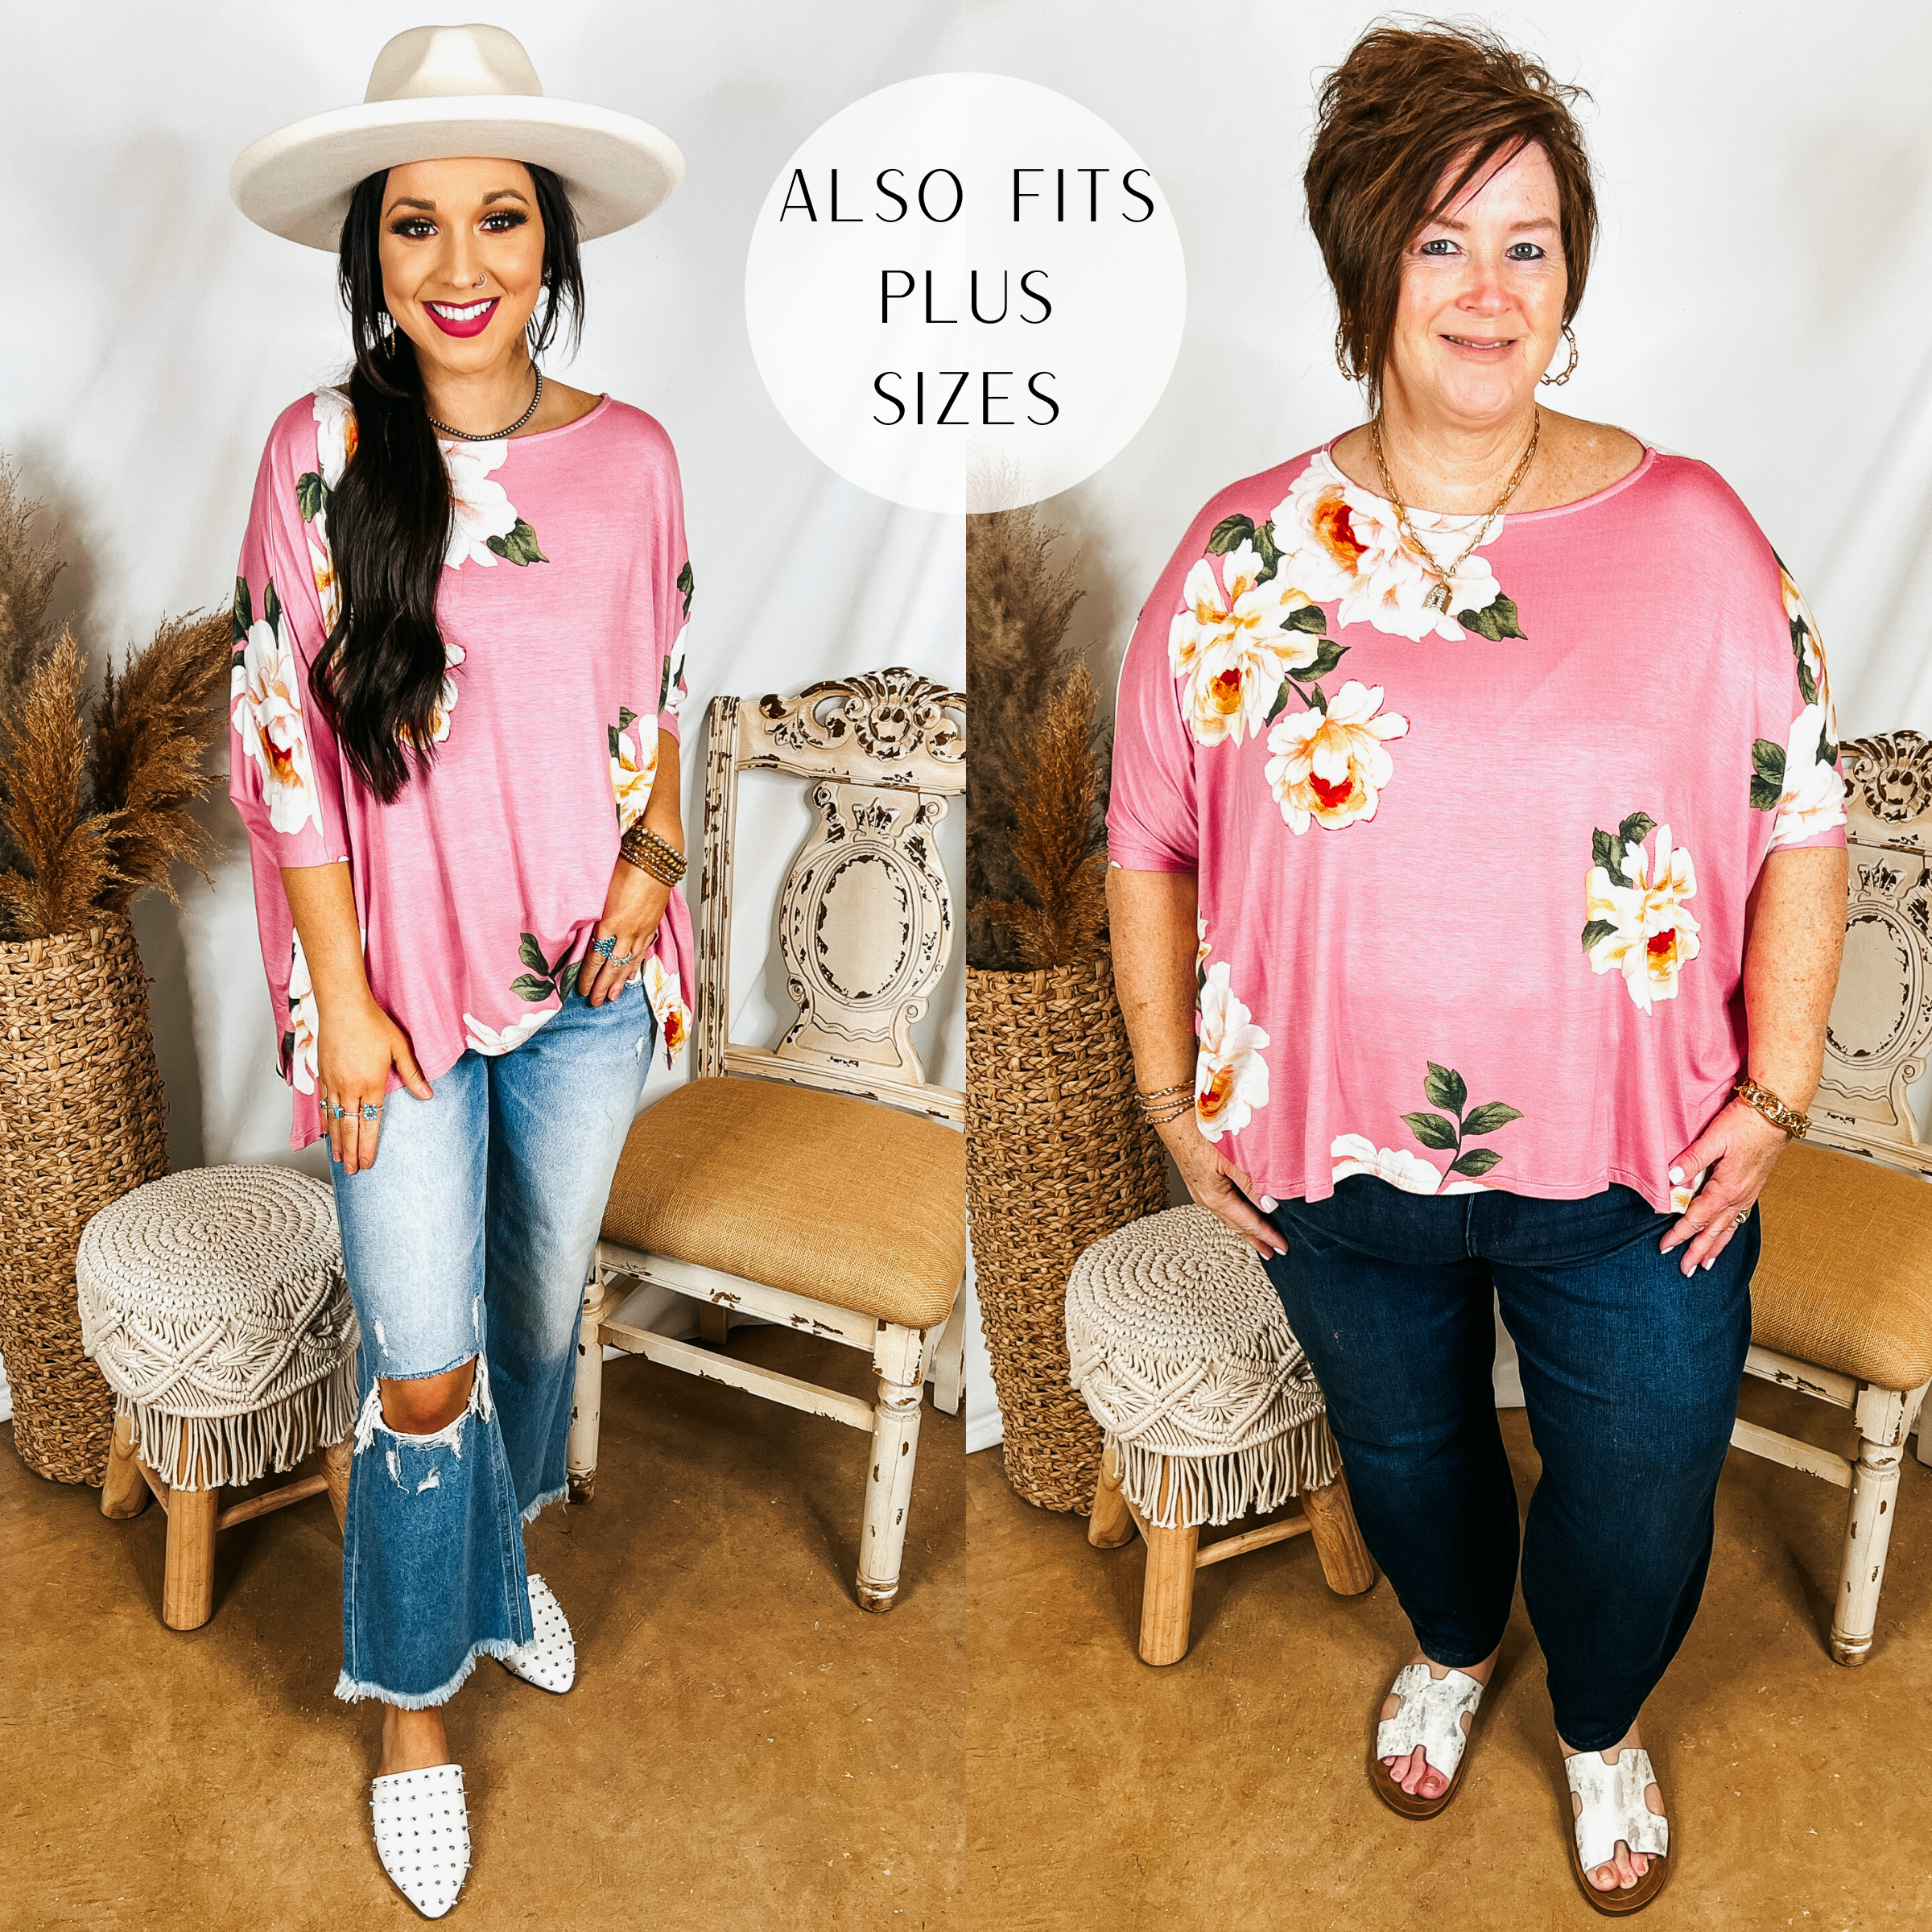 Models are wearing a pink poncho top with ivory flowers. Size small model has it paired with cropped distressed jeans, white mules, and an ivory hat. Plus size model has it paired with dark wash jeans, white sandals, and gold jewelry.